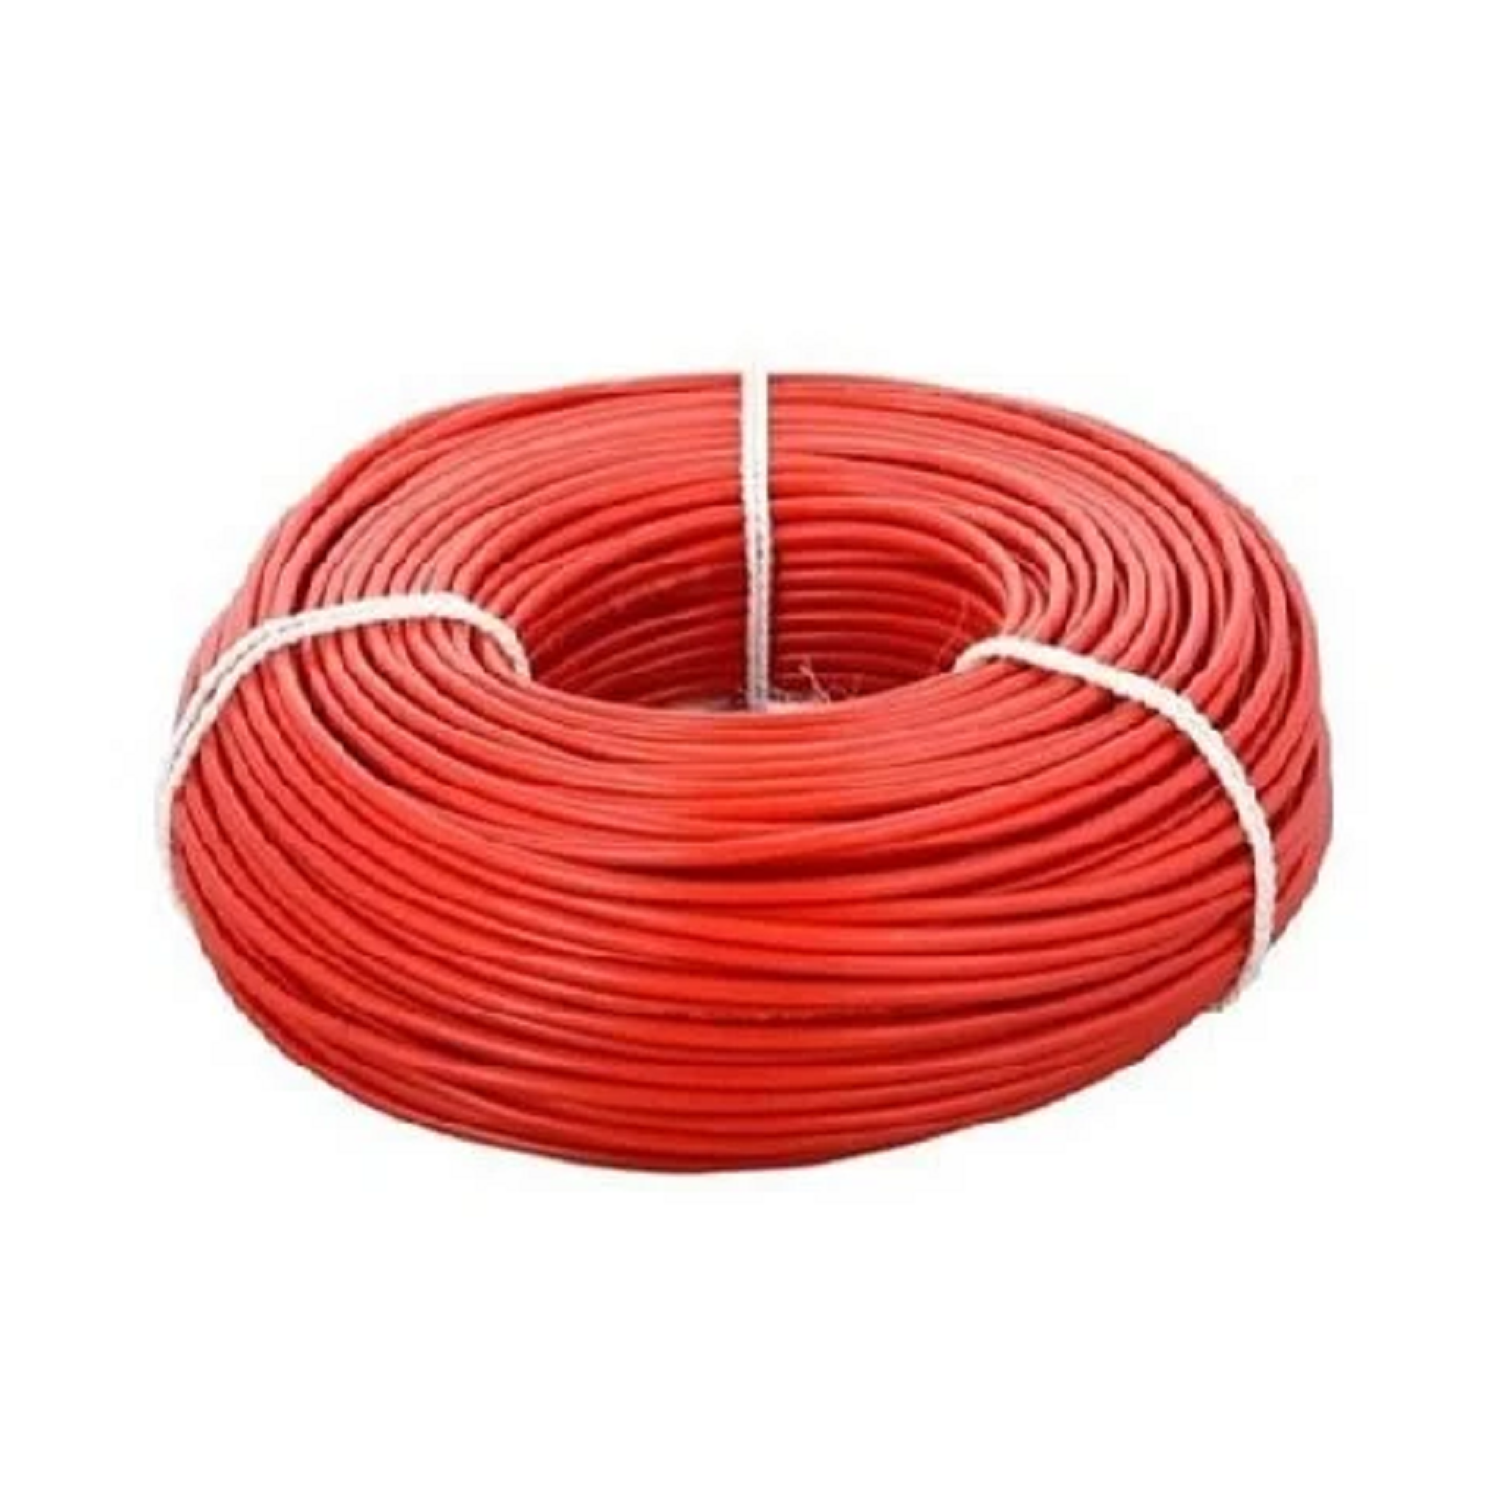 1.0 Sqmm KEI FR Single Core Copper Wire (180 Mtr) With PVC Insulated for Domestic 38 Industrial Uses